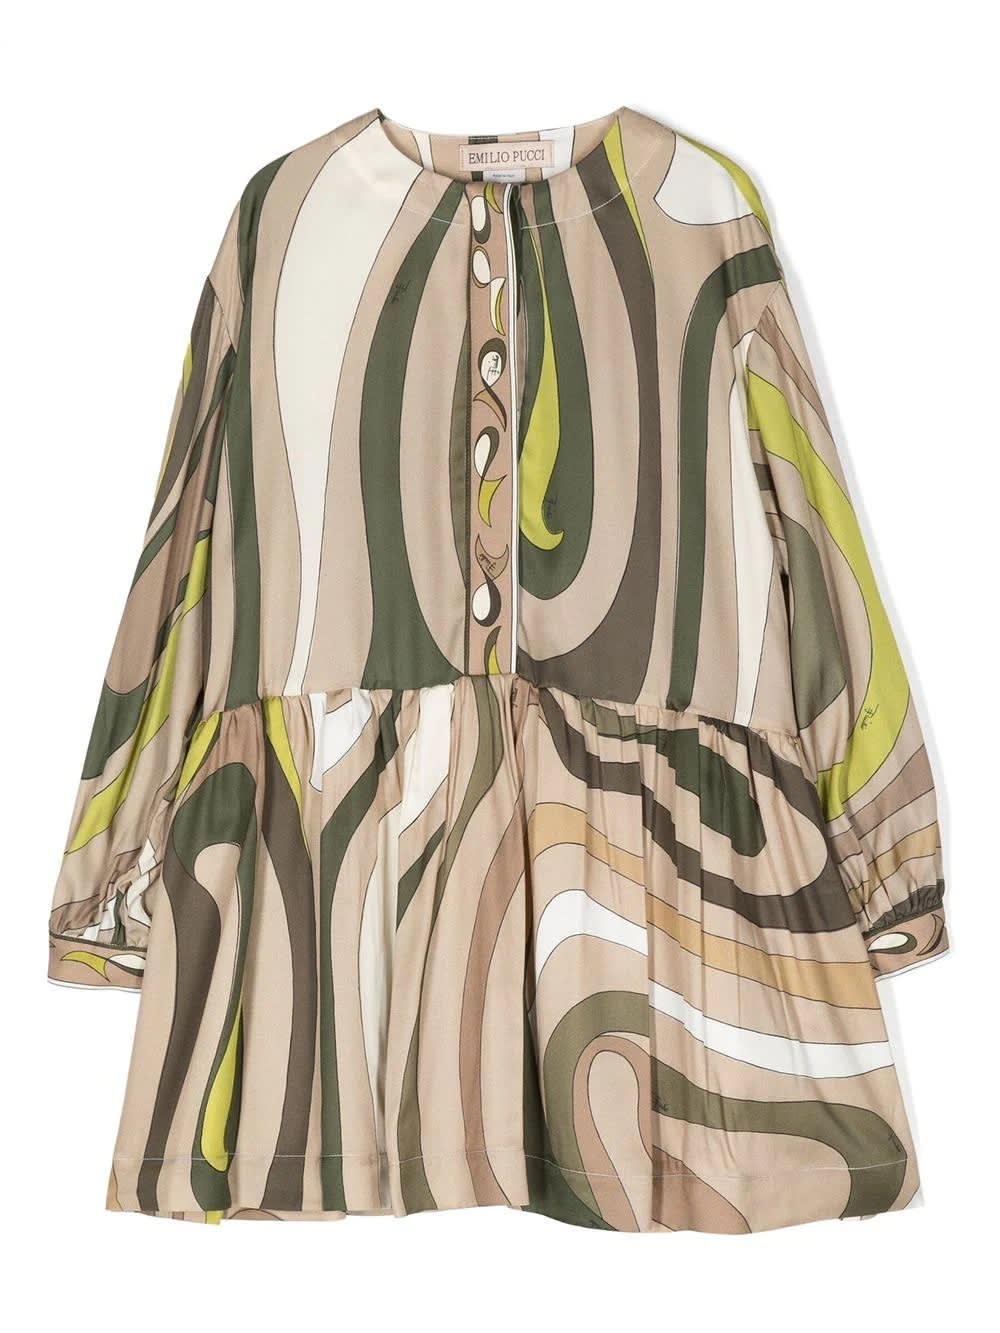 EMILIO PUCCI GREEN DRESS WITH MARBLE PRINT